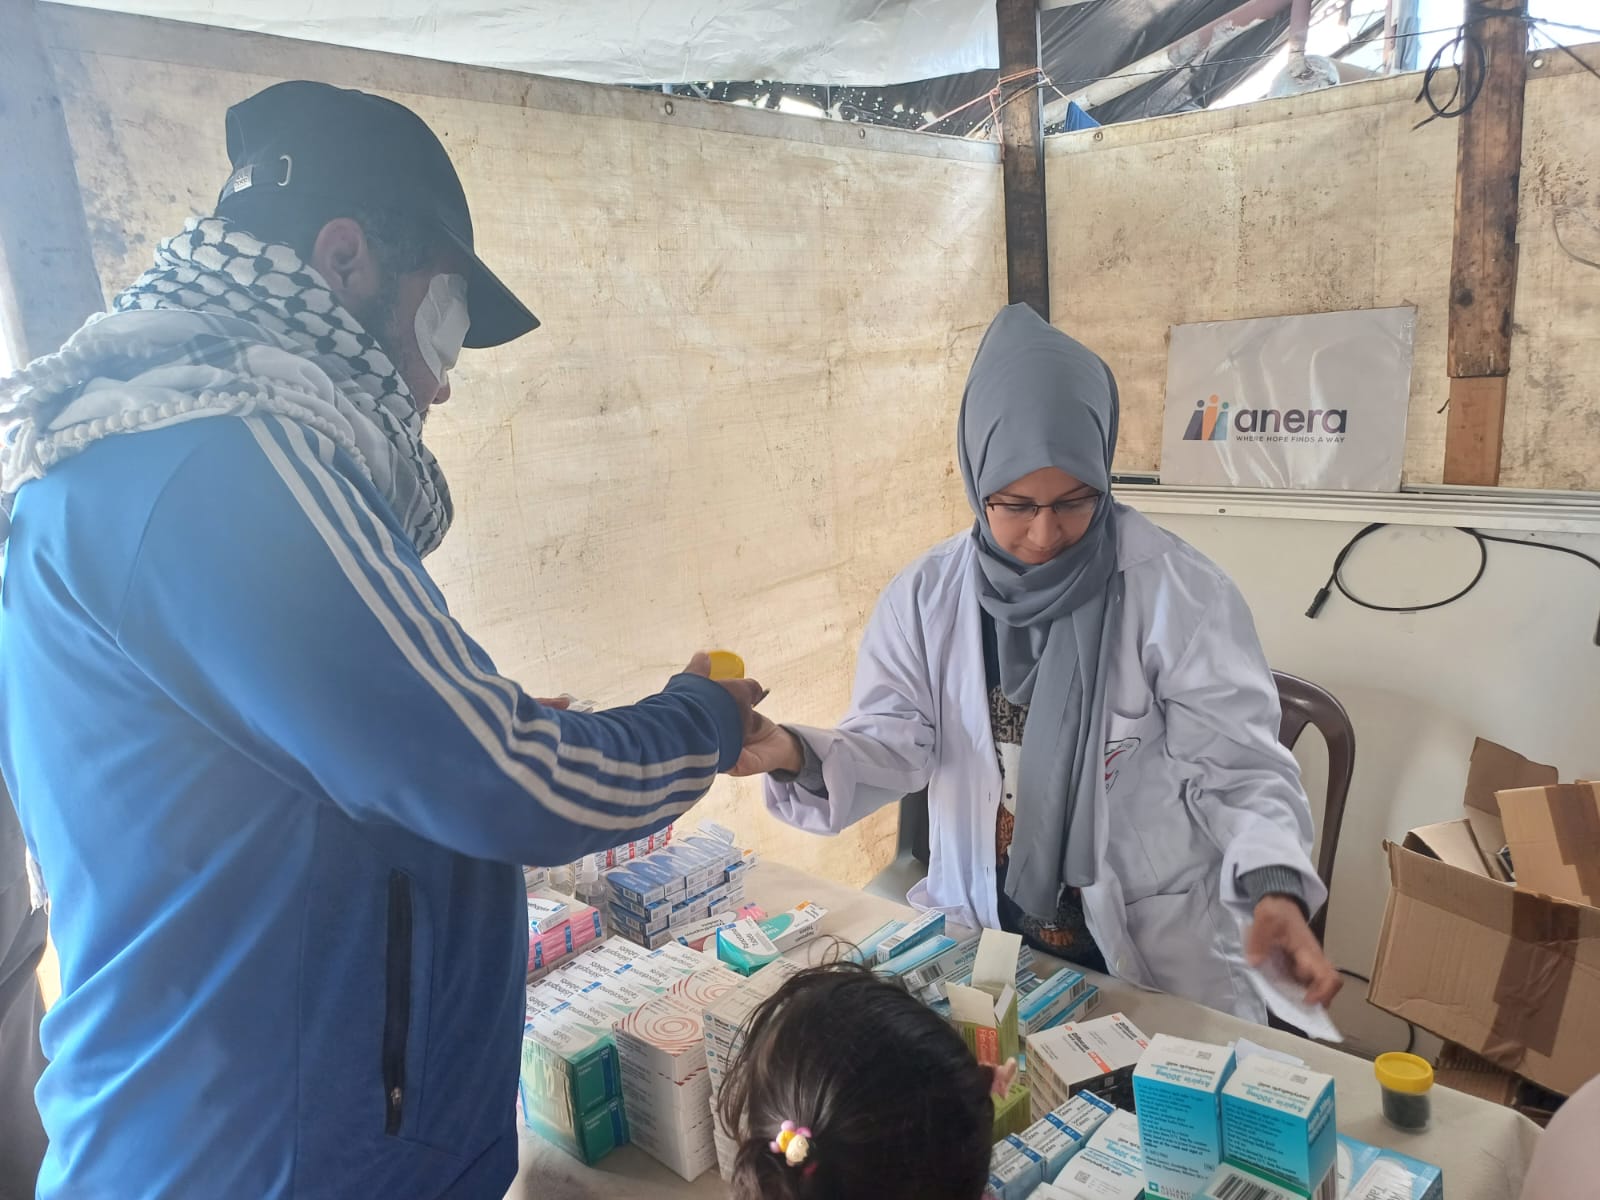 A woman in a white coat and headscarf hands a bottle to a man with a patch on his face. She stands behind a table with boxes and bottles of medicine on top under a makeshift tent structure.